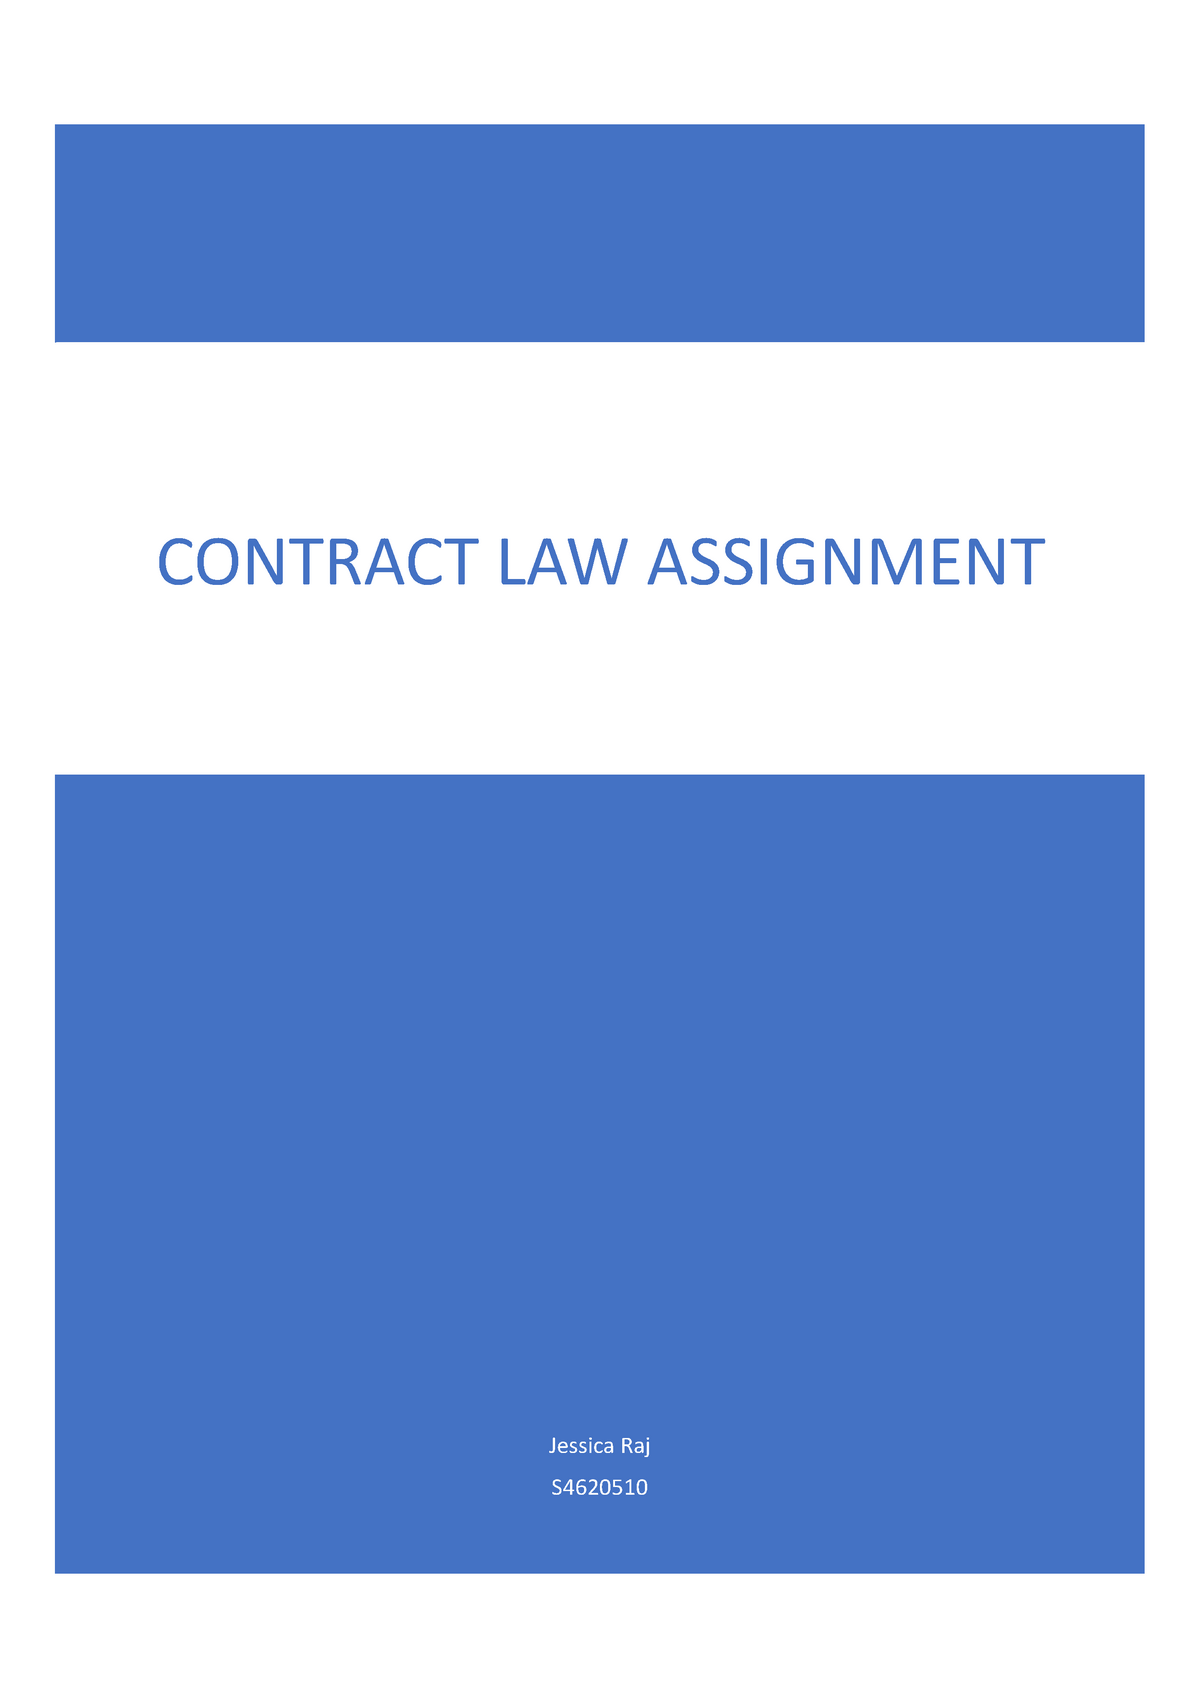 texas law assignment of contract